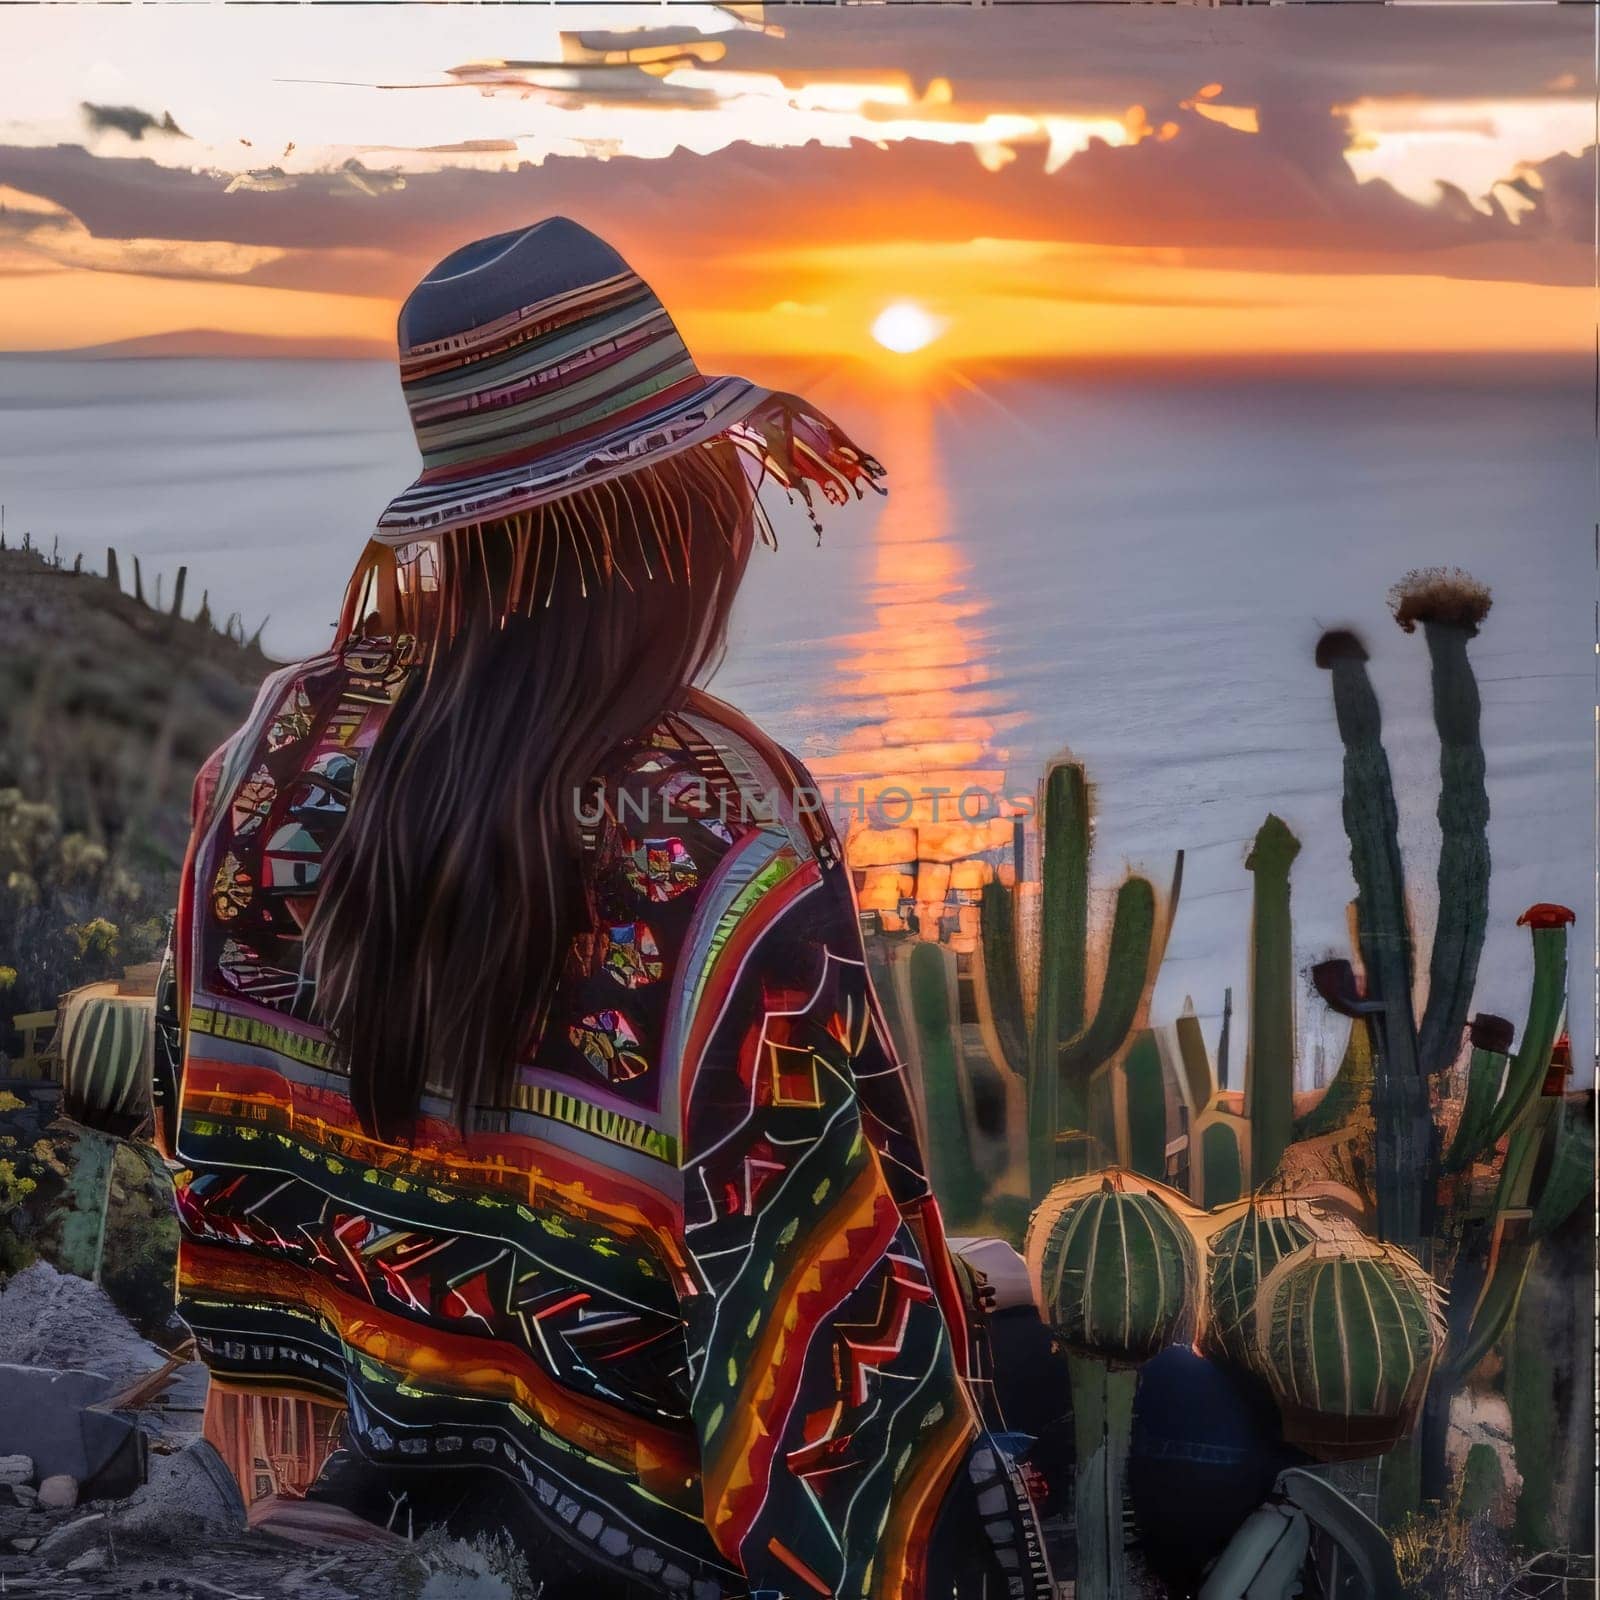 Plant called Cactus: A woman in a Mexican poncho and a hat looks at the sunset.